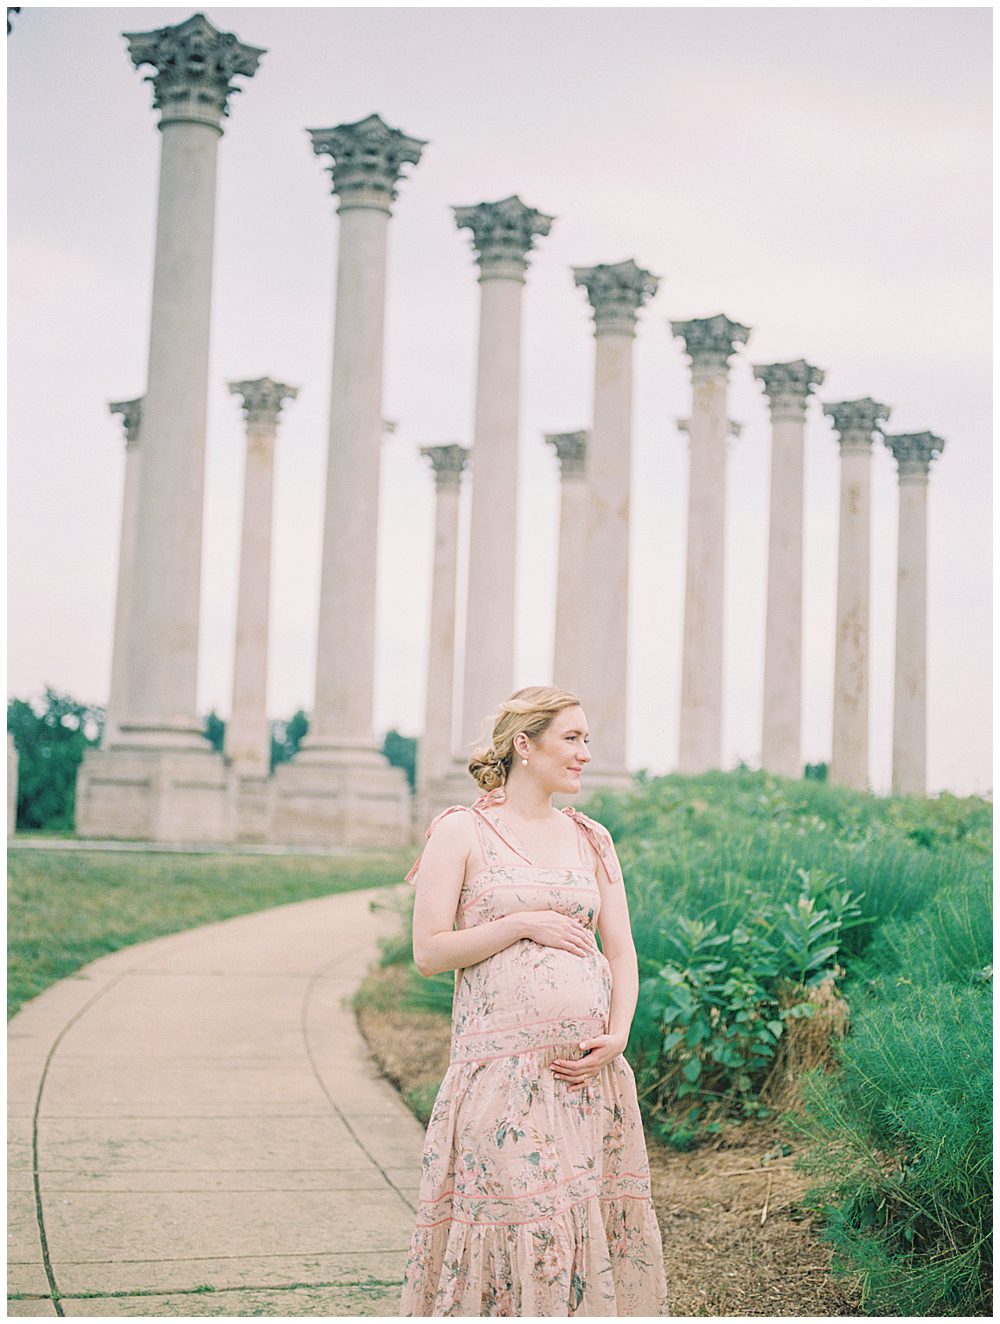 Pregnant blonde mother stands in front of National Arboretum columns with hands on belly during maternity session as her hair blows in wind.